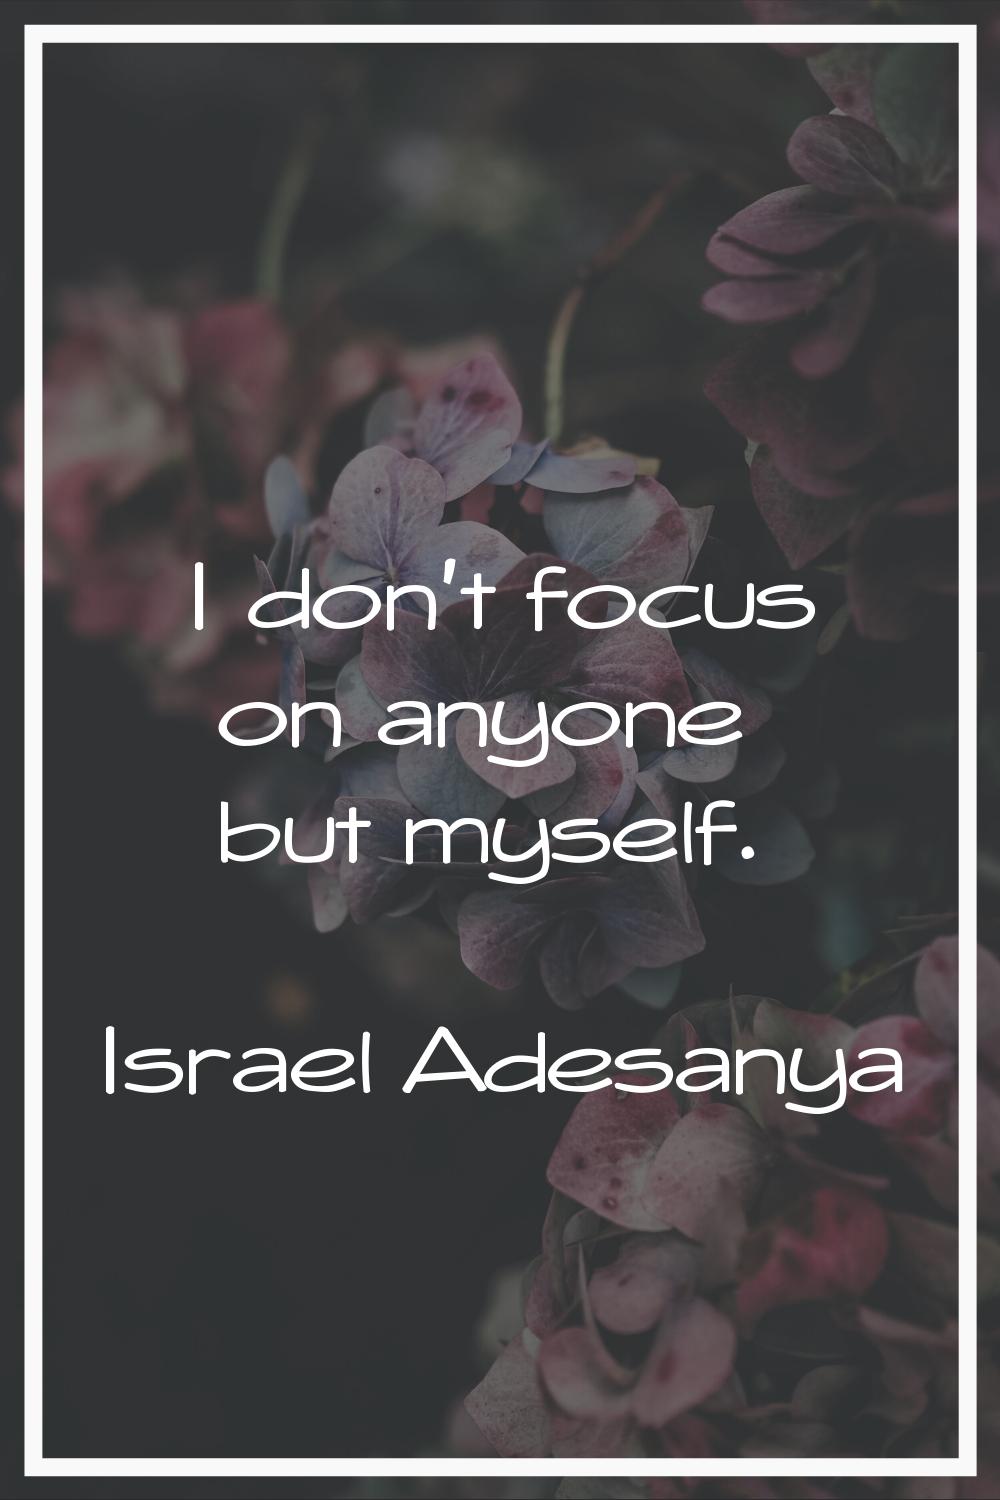 I don't focus on anyone but myself.